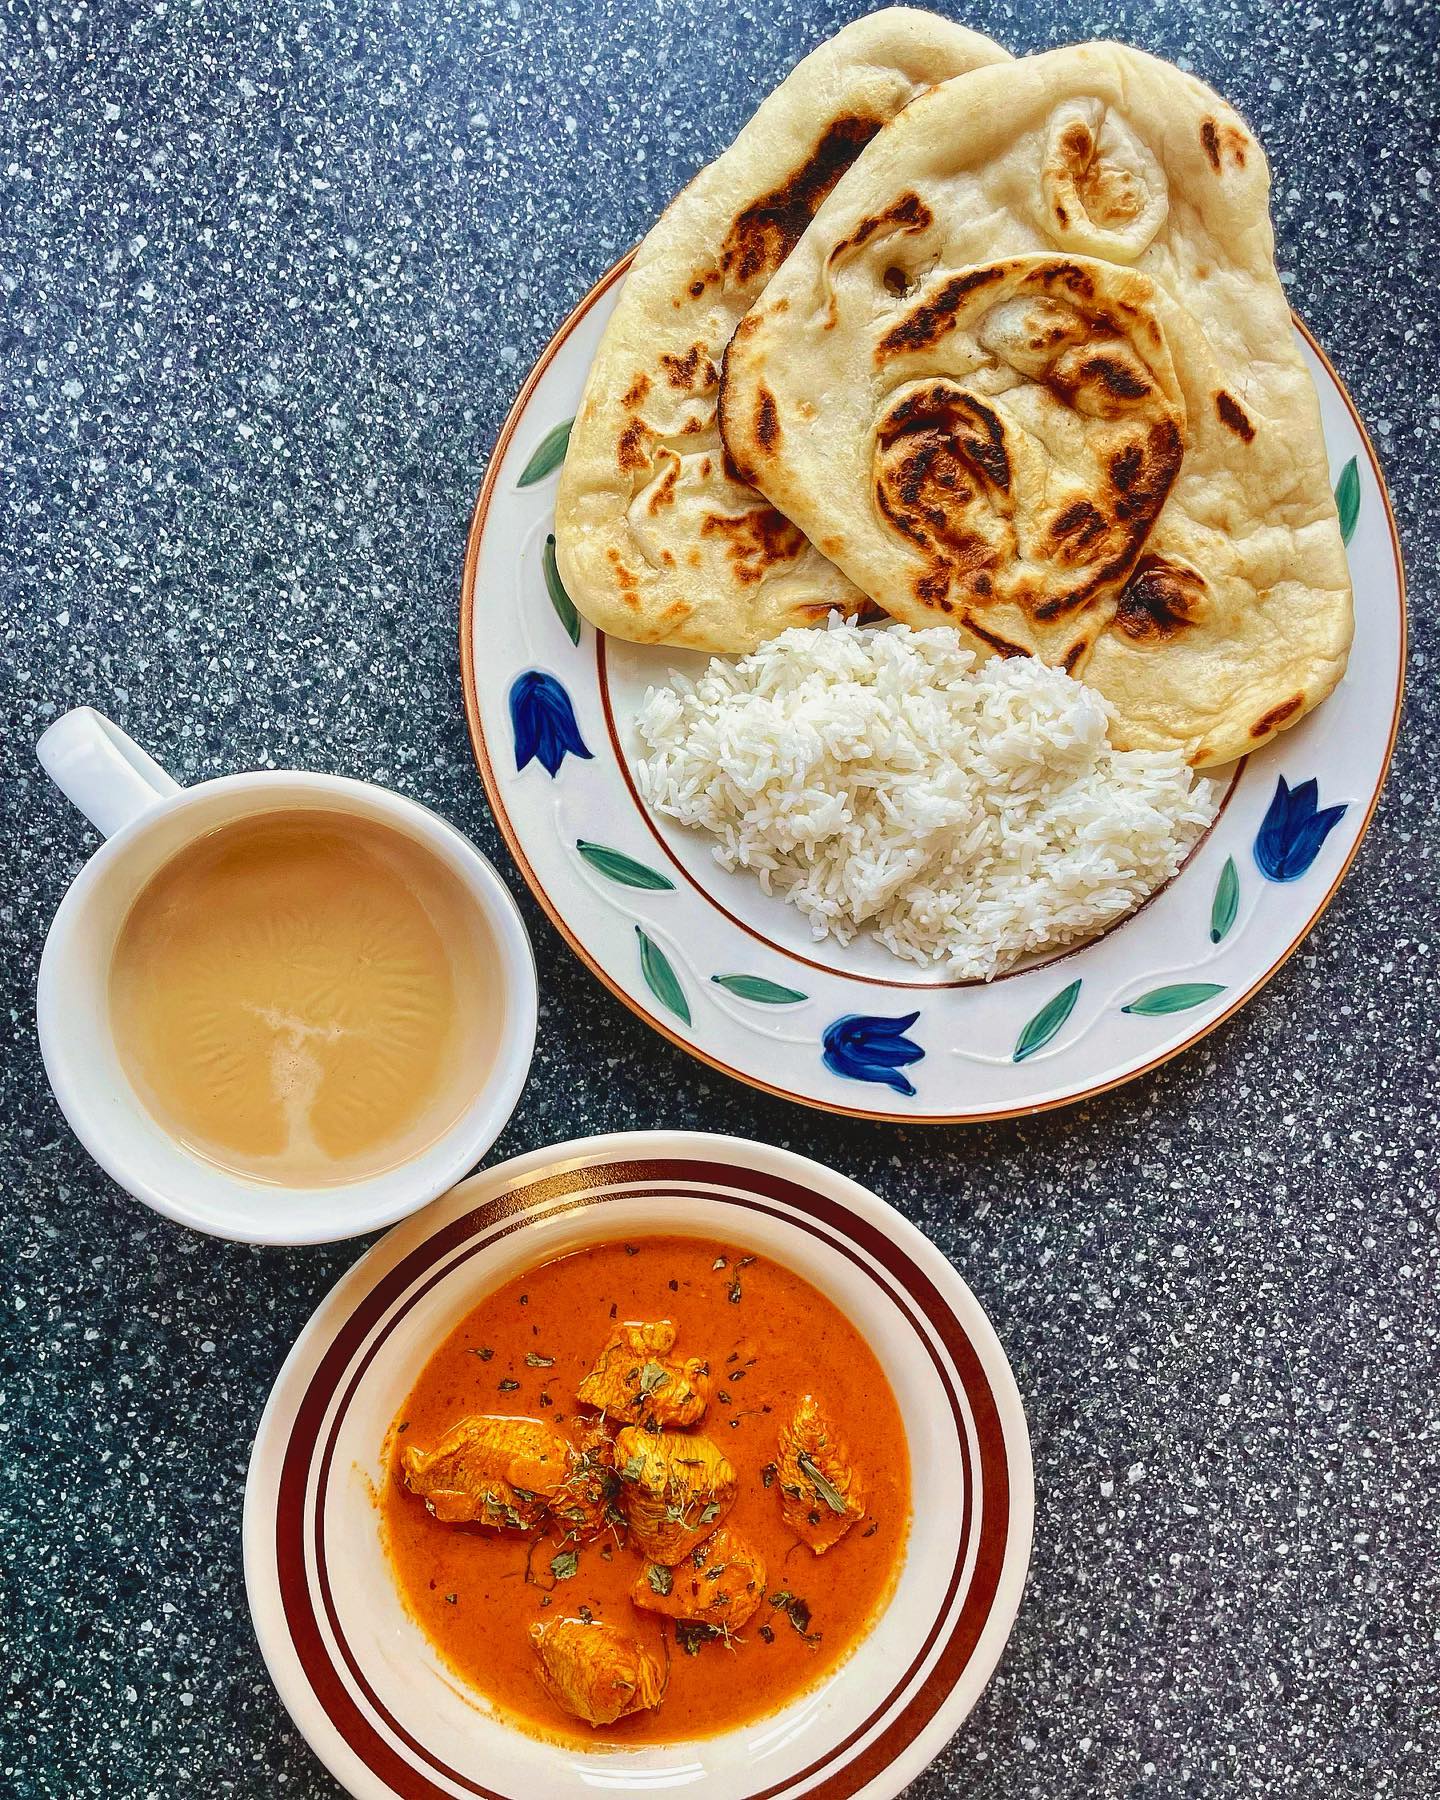 A cup of chai, plate of naan and rice, and a bowl of butter chicken on a table.